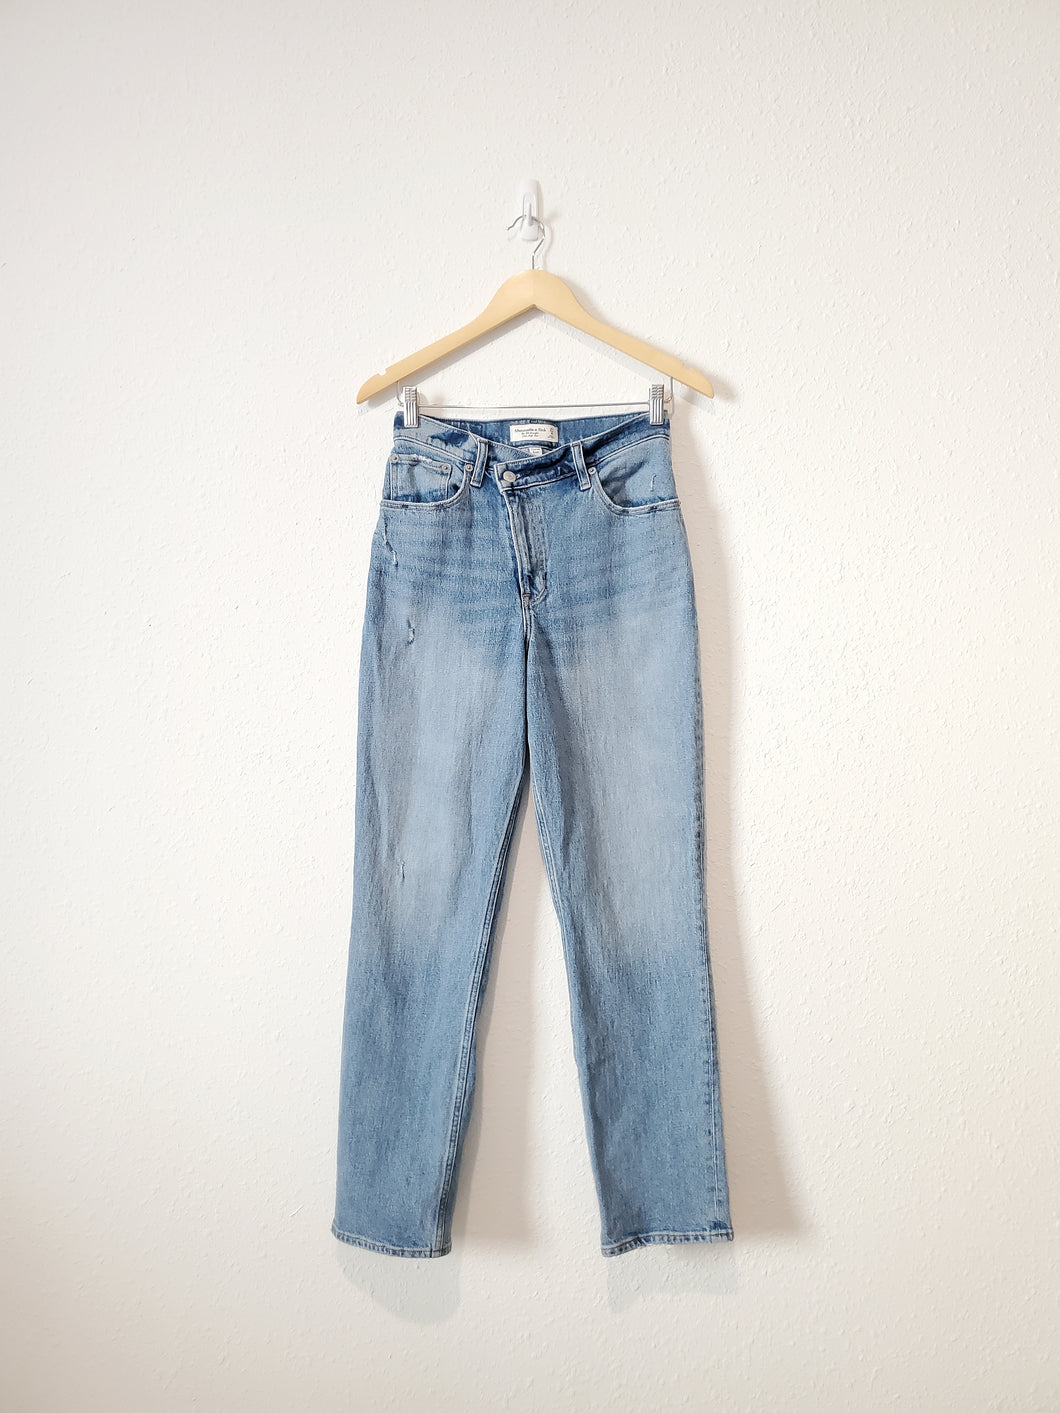 A&F 90s Straight Jeans (27/4)